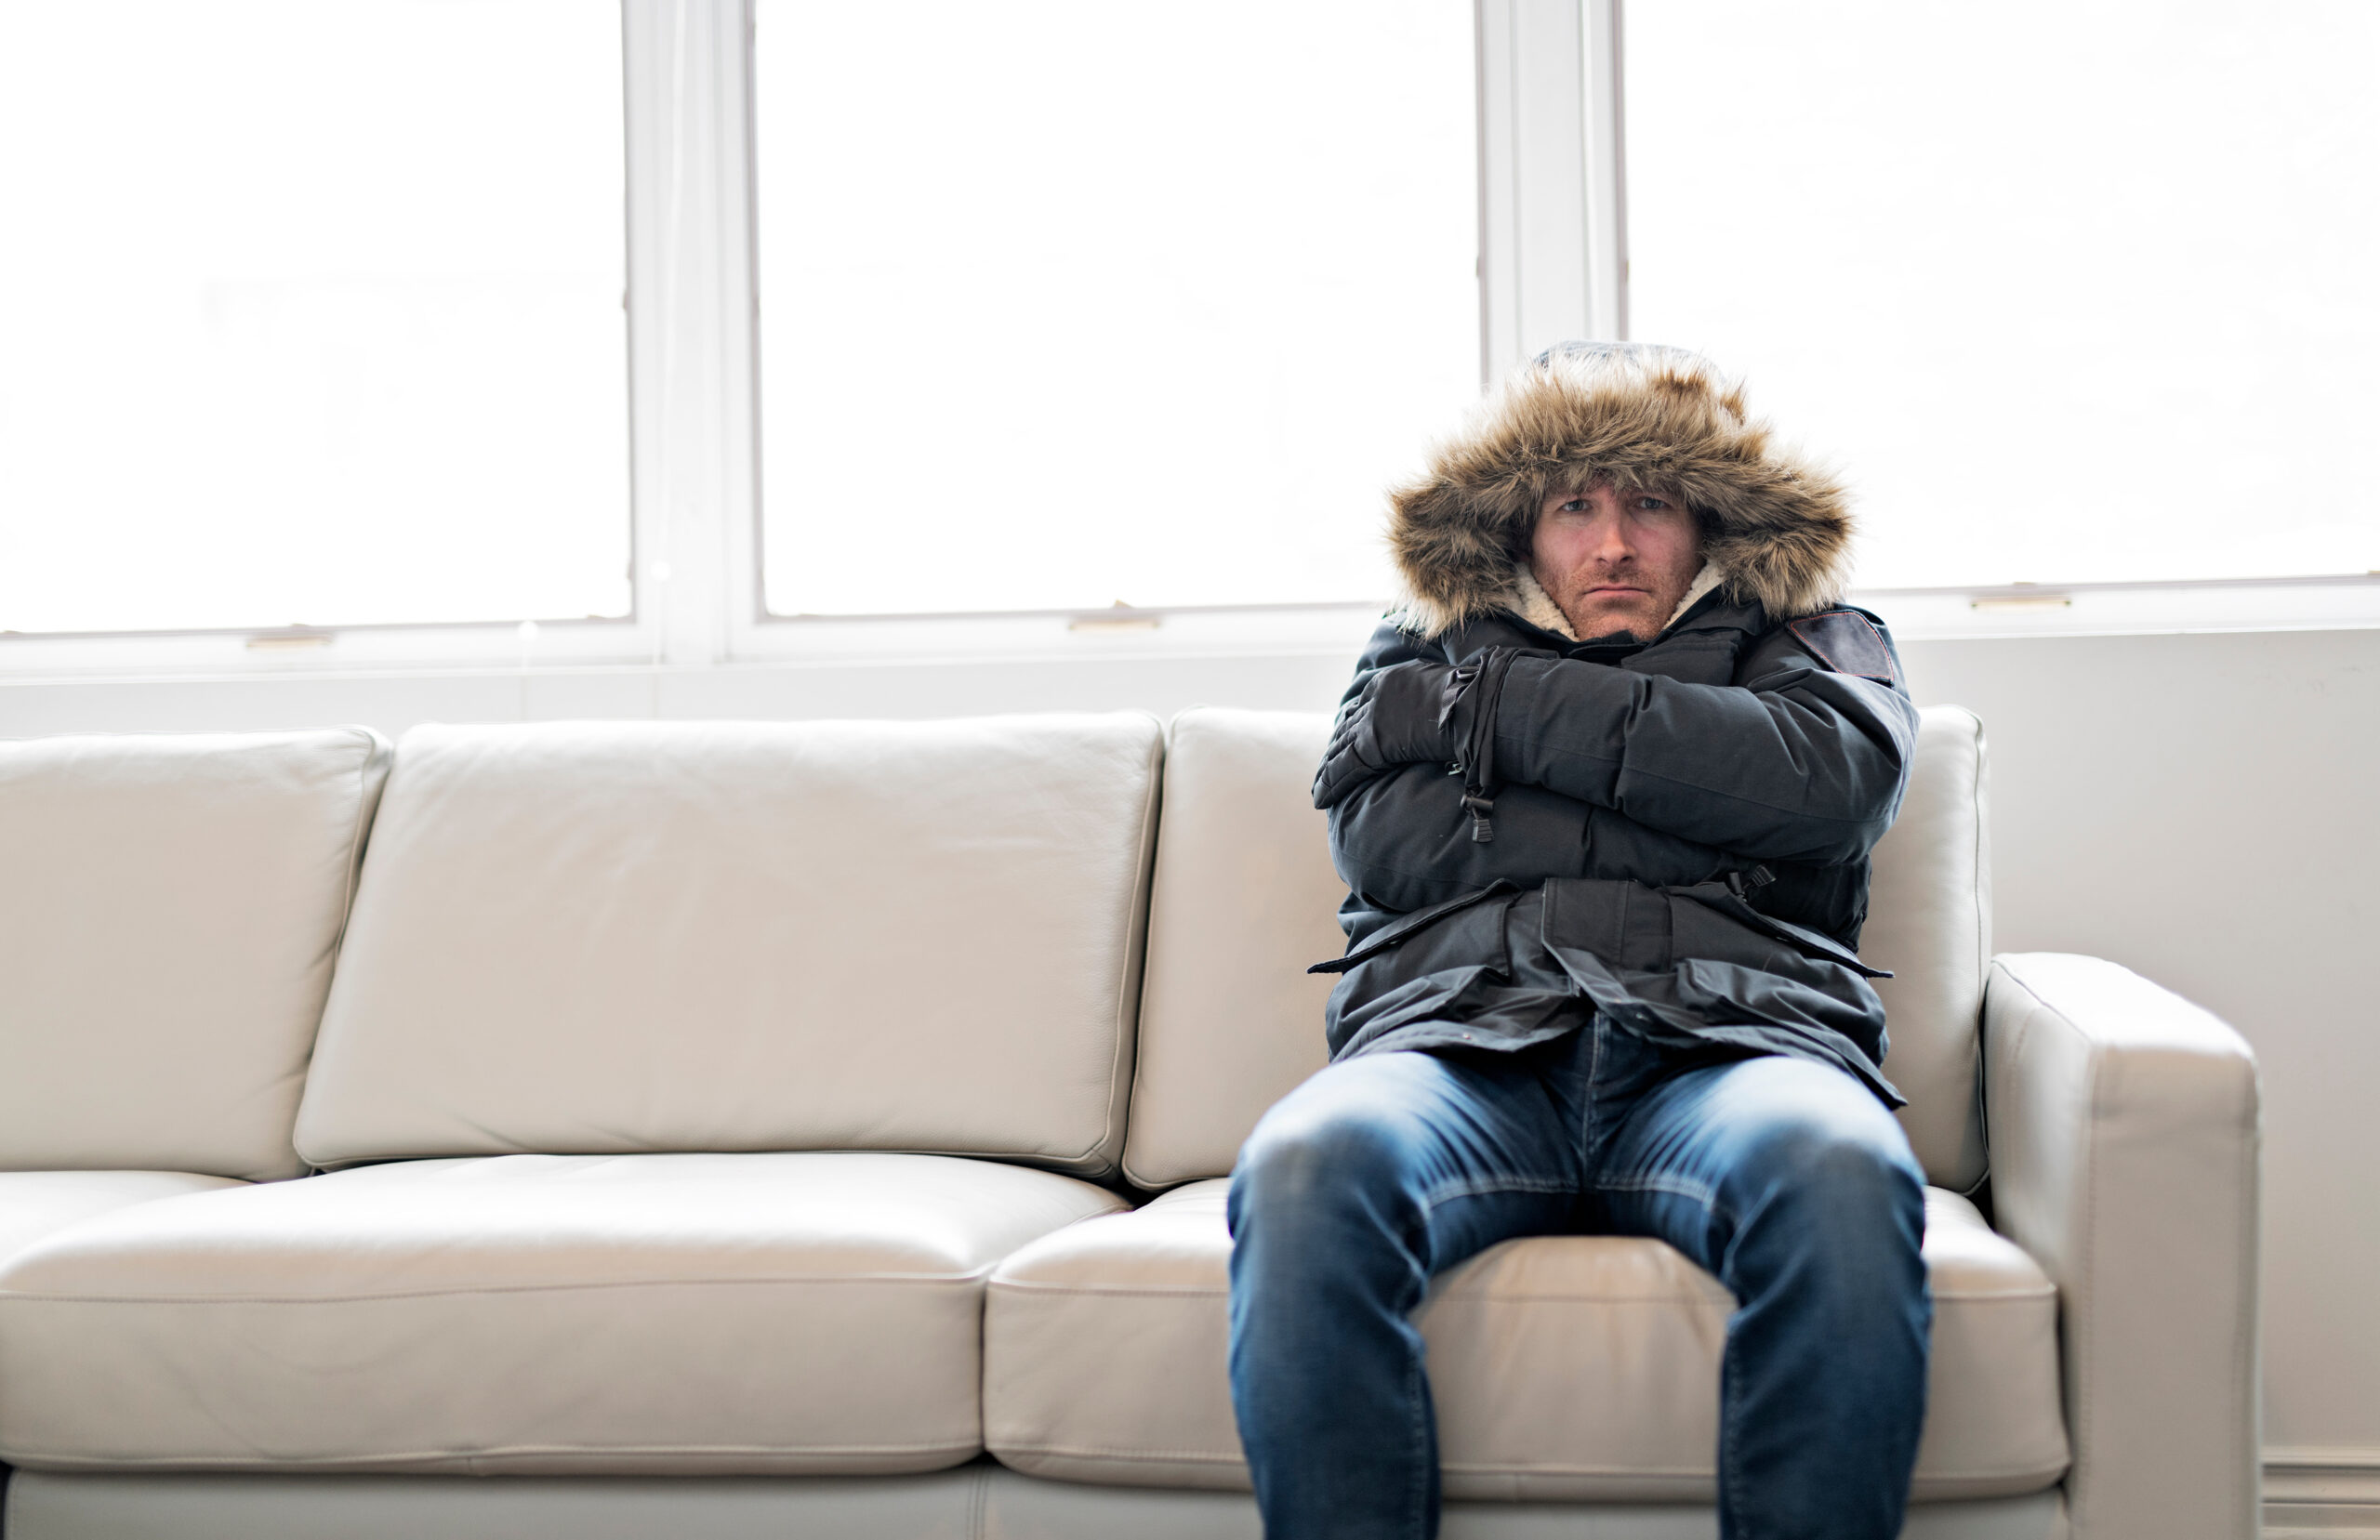 Man With Warm Clothing Feeling The Cold Inside House on the sofa